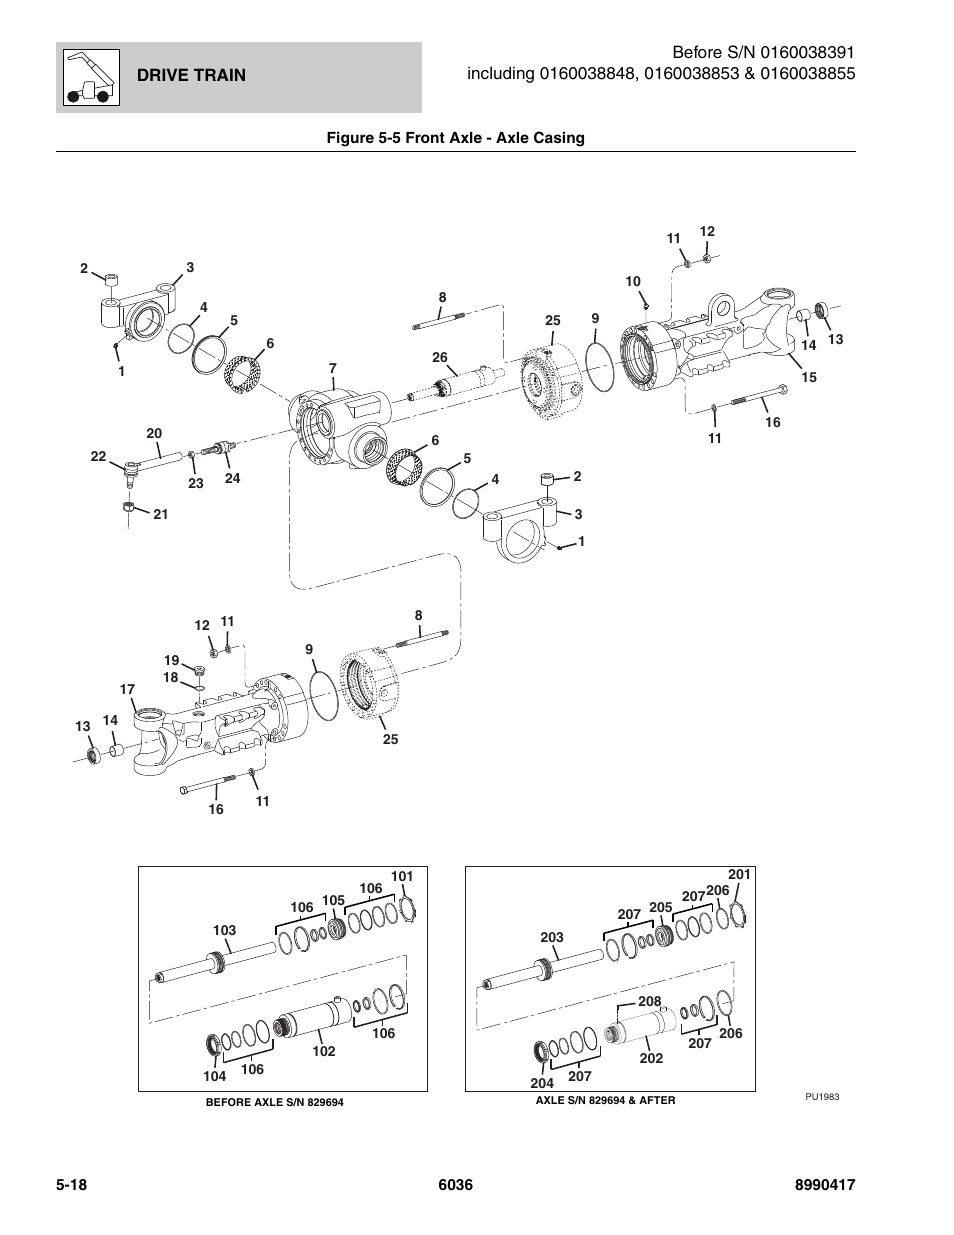 Figure 5-5 front axle - axle casing, Front axle - axle casing -18, Axle